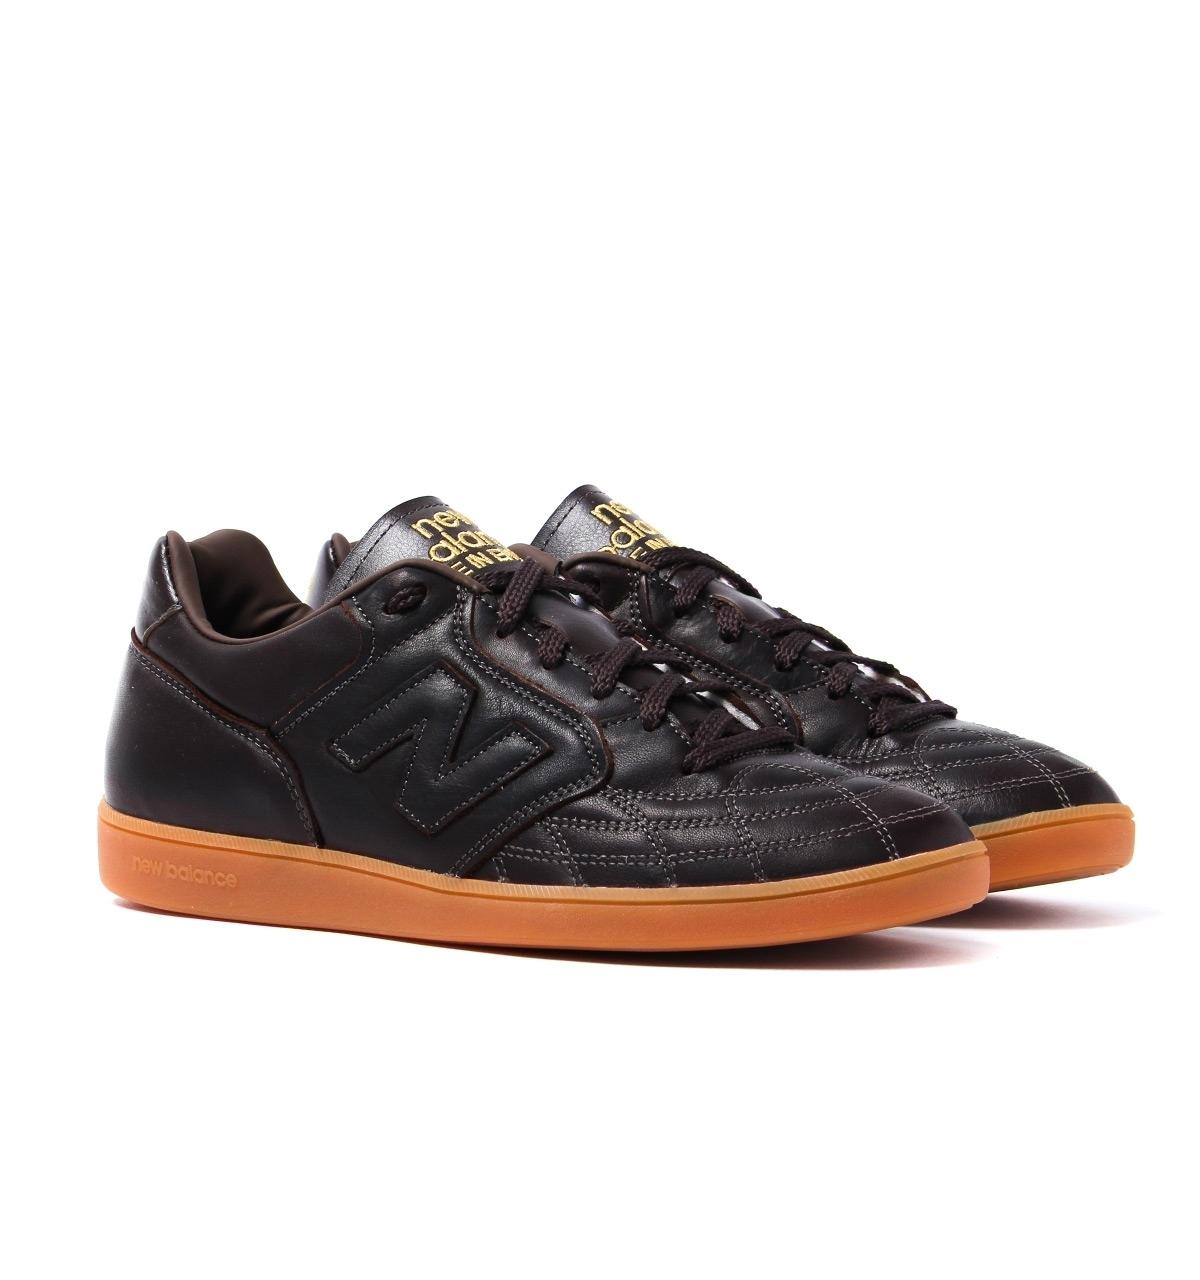 New Balance Epic Trth Brown Leather Trainers for Men - Lyst